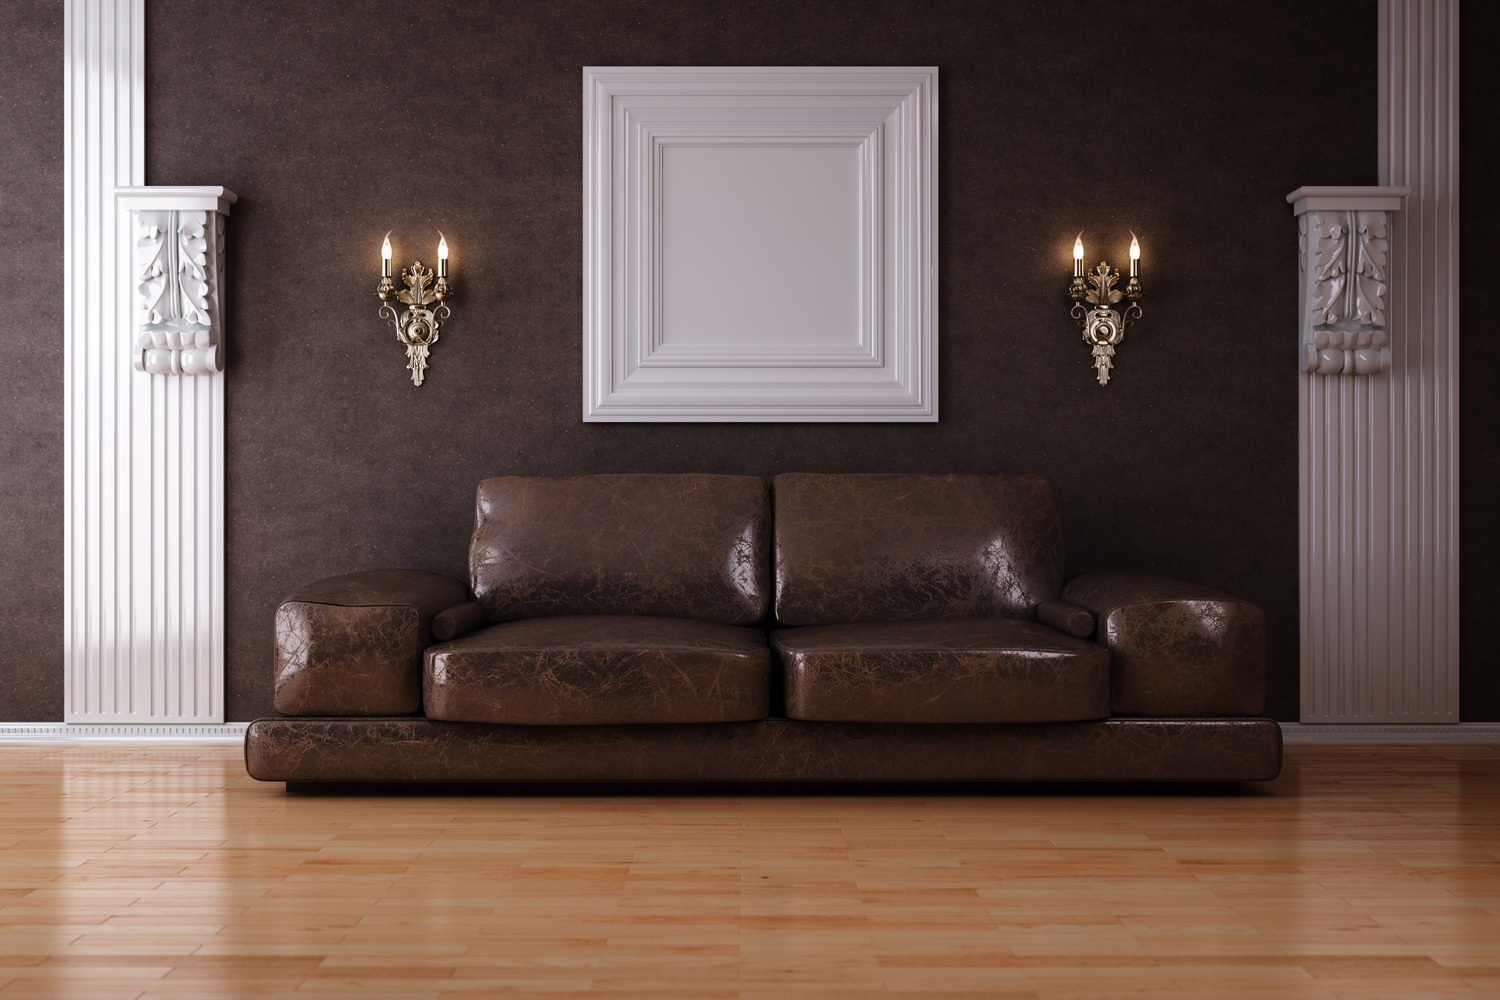 Sofa in luxury Interior Against Wall